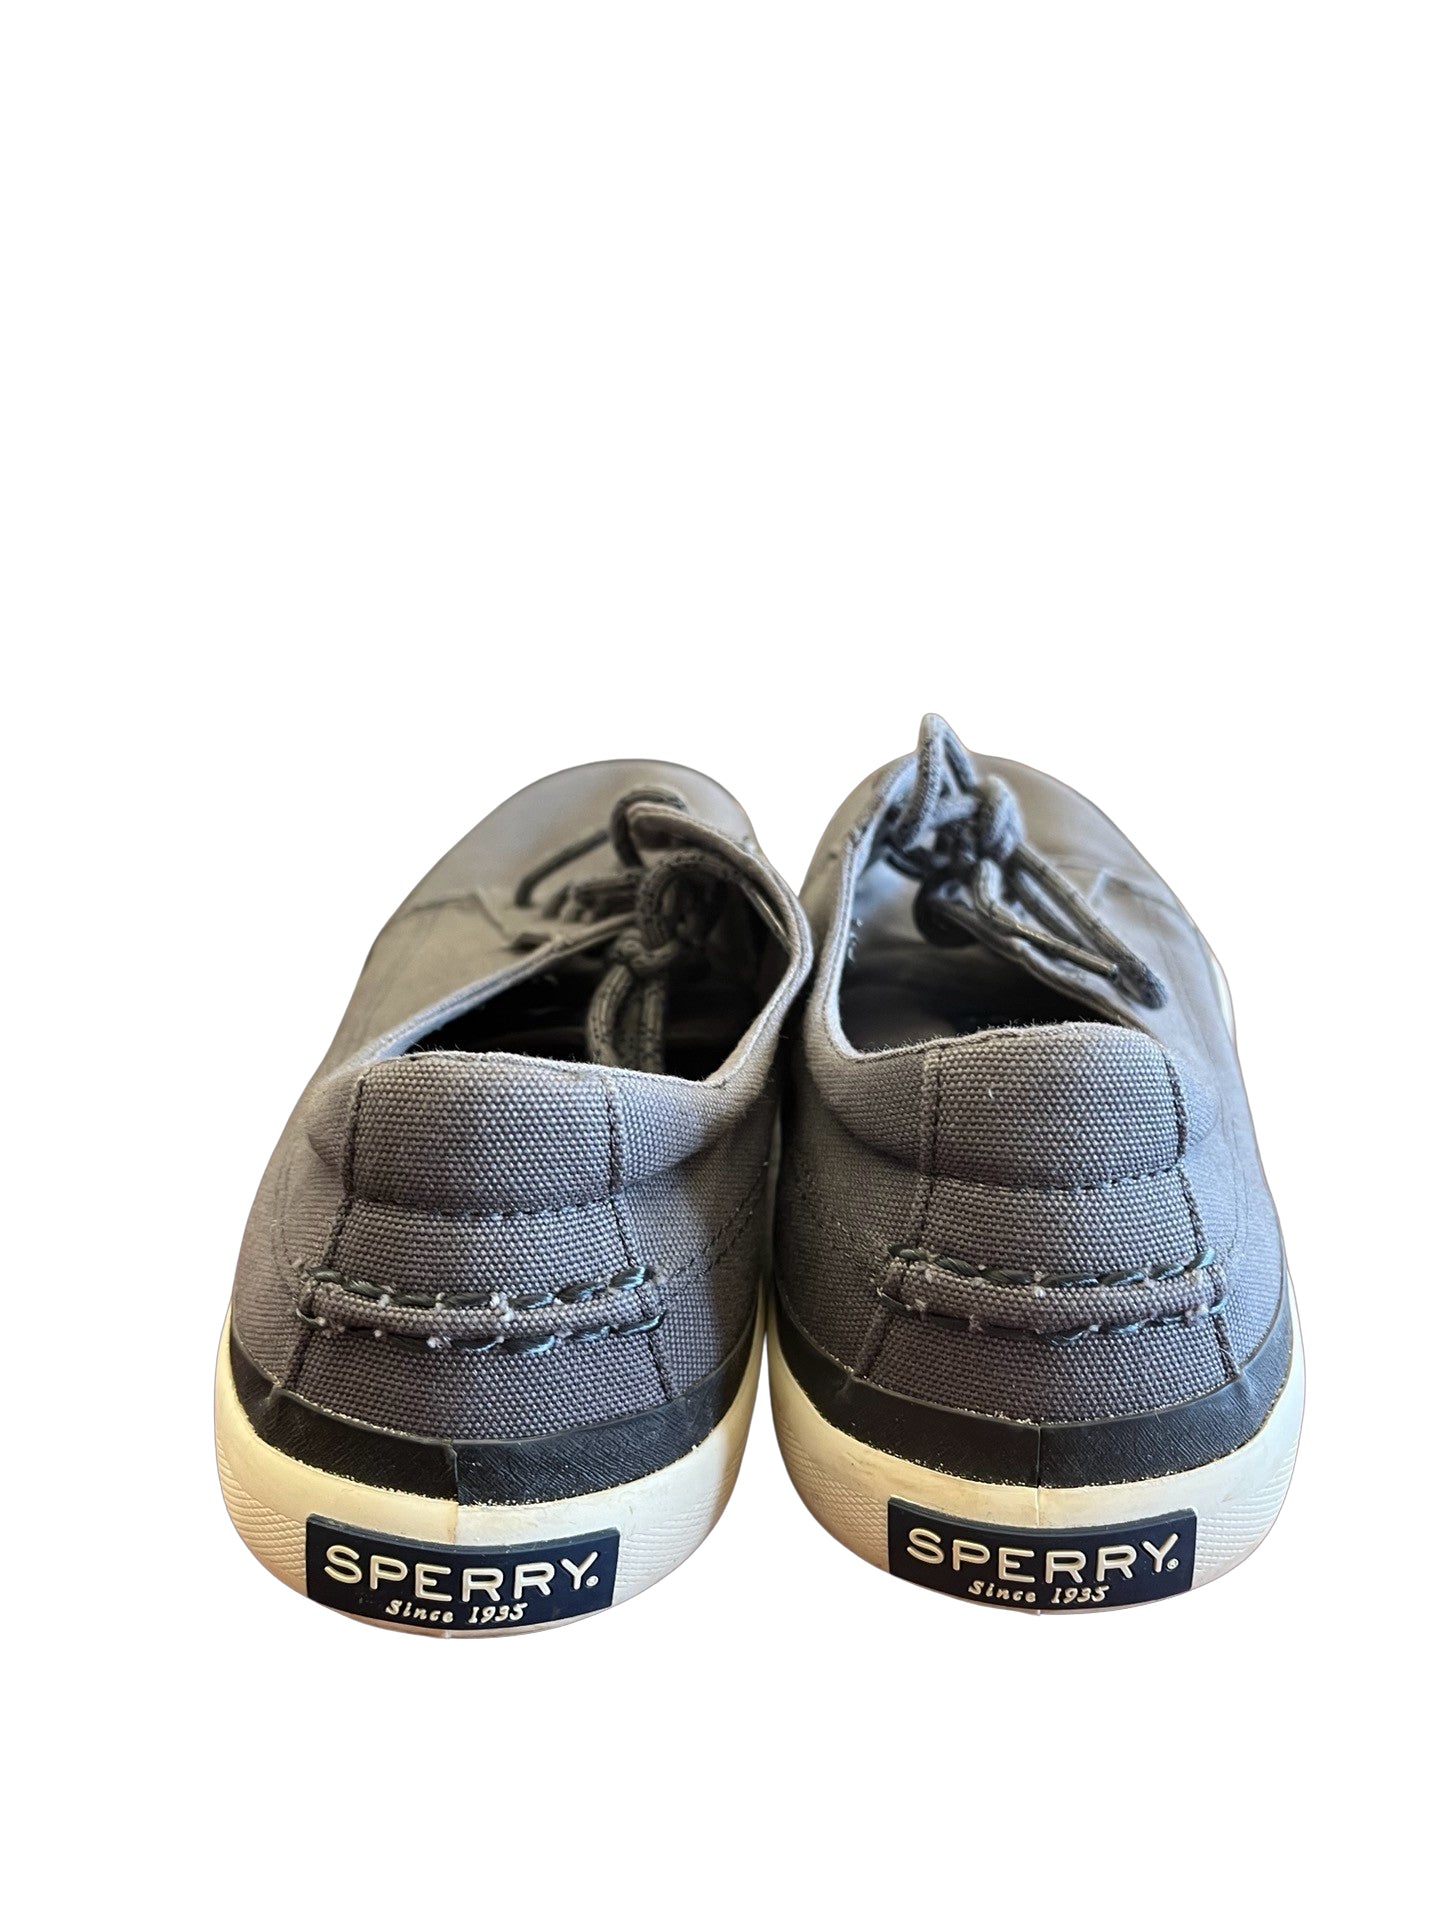 Sperry Top Sider Size 10.5 Gray sneakers